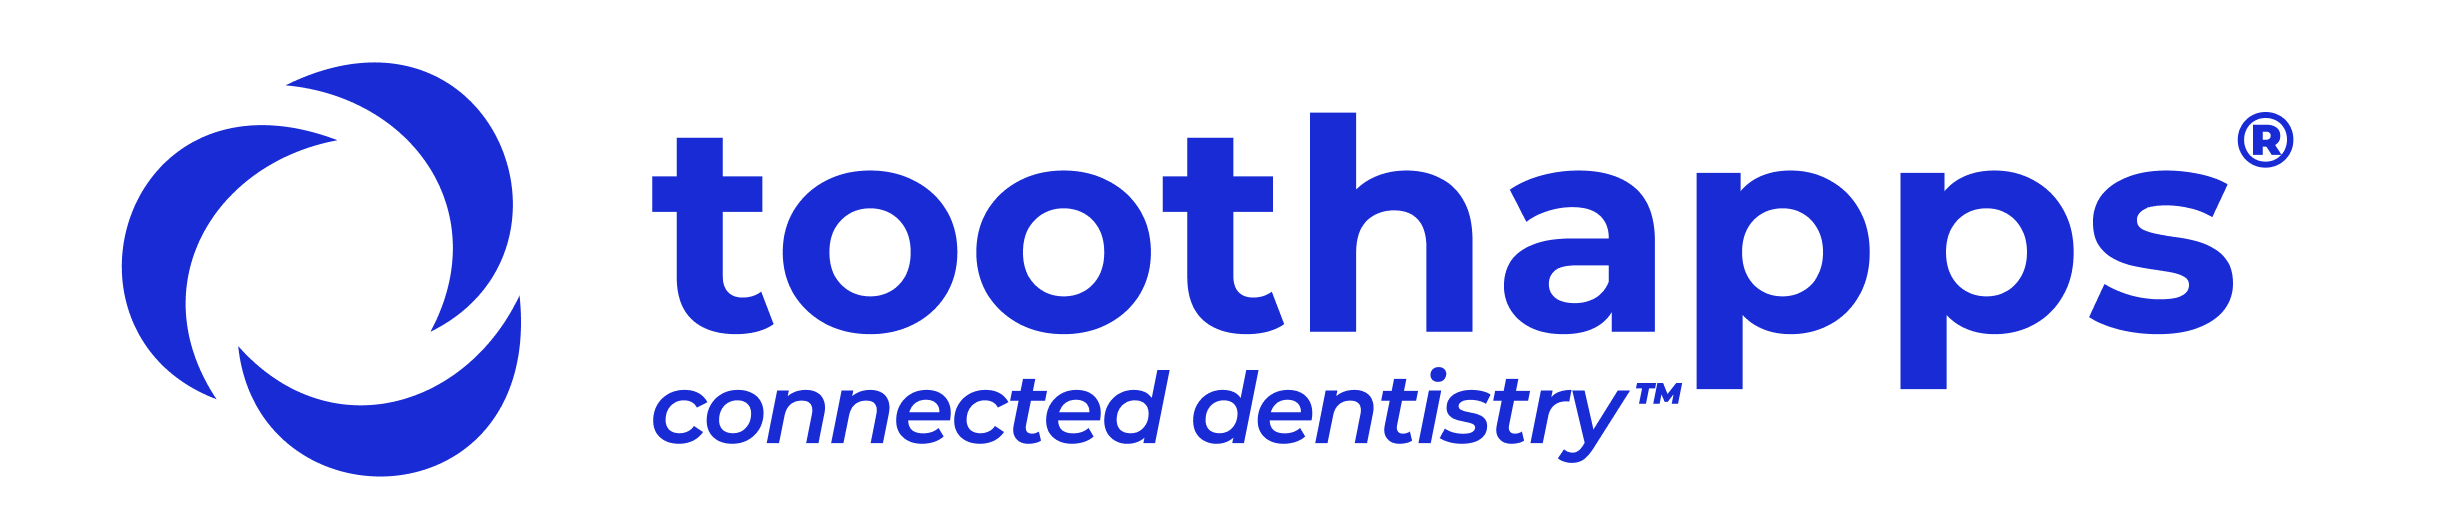 Toothapps-Connected-Dentistry-Logo_2442x512 (1)